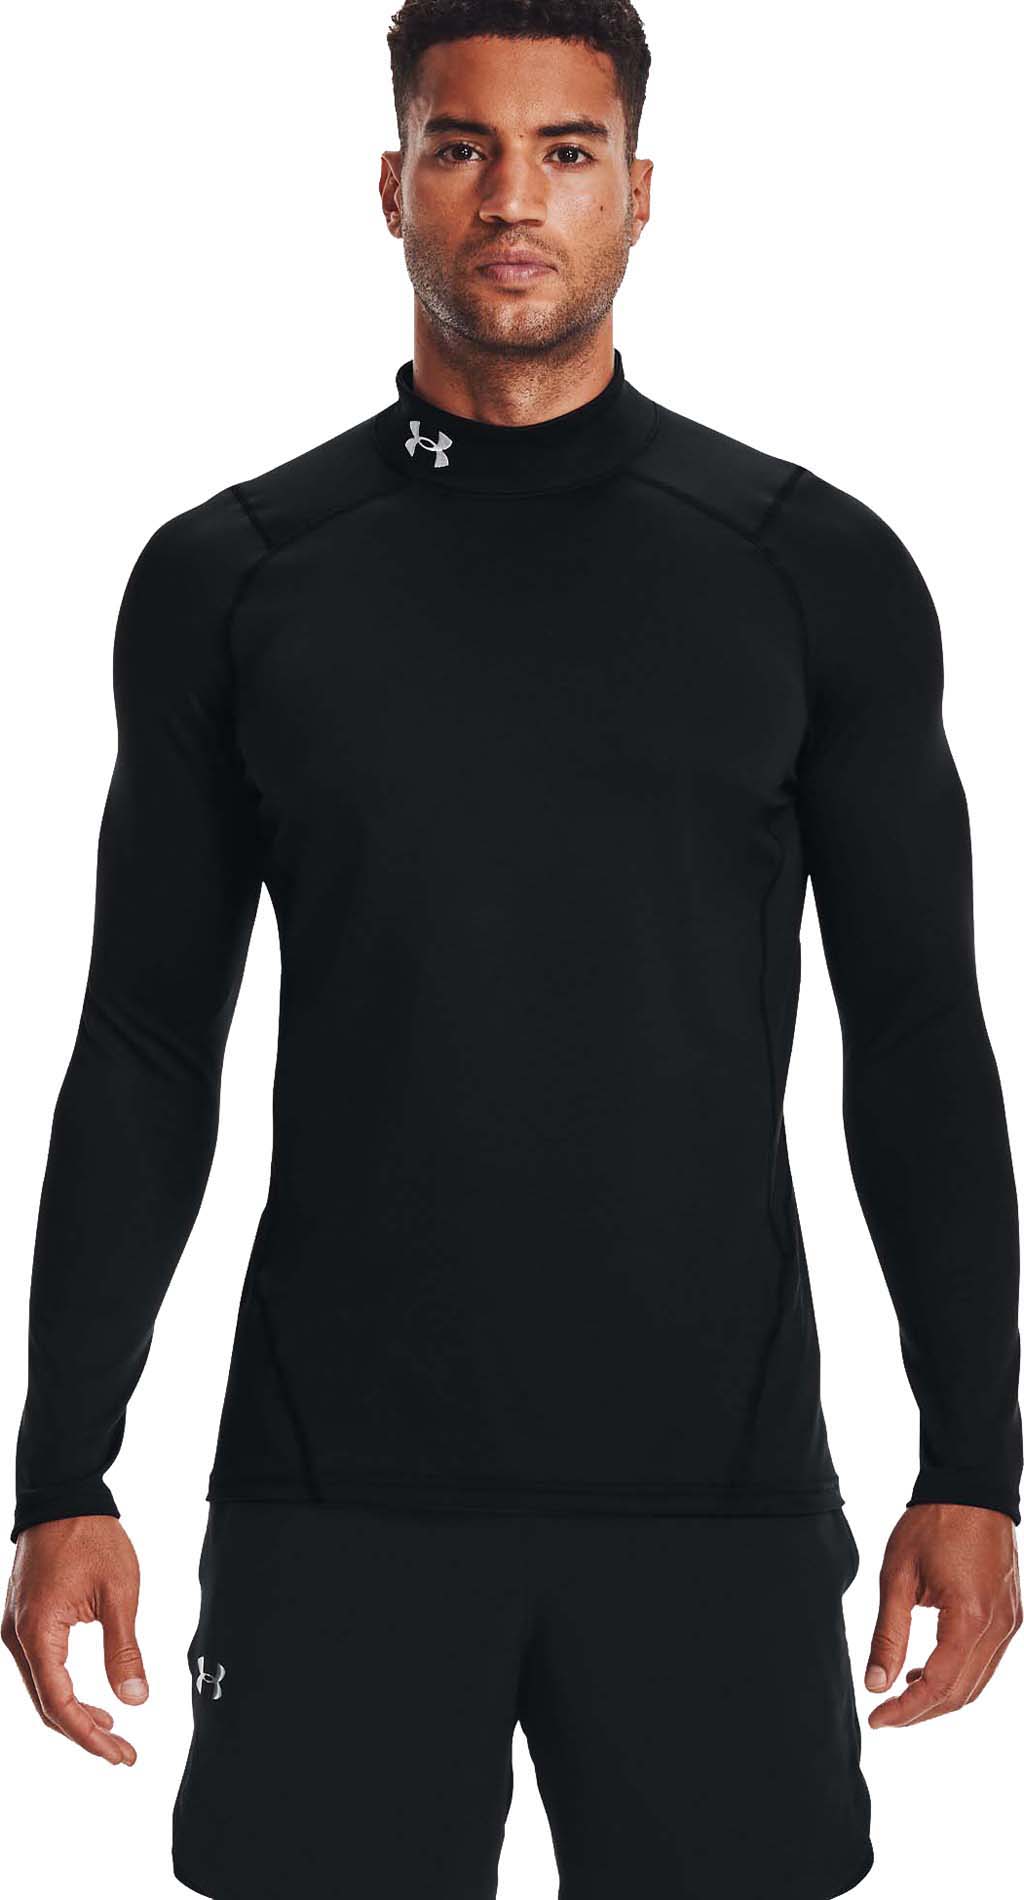 UNDER ARMOUR Black Fitted Baselayer ColdGear Mock Neck White Seams